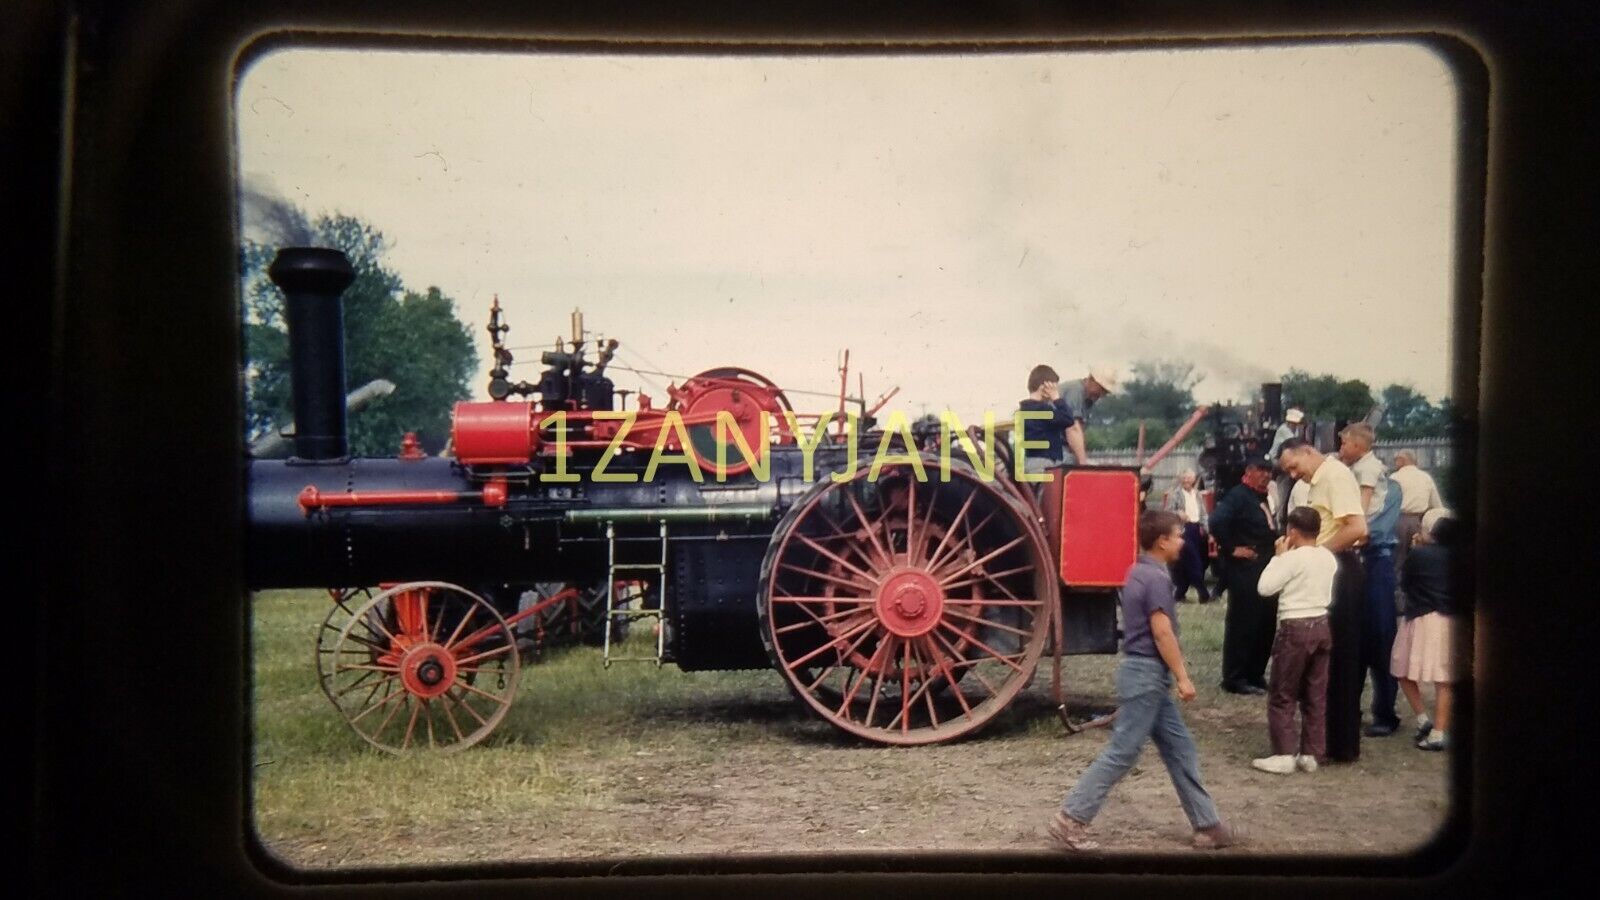 AN14 VIINTAGE 35mm SLIDE TRANSPARENCY Photo STEAM ENGINE TRACTOR AT FAIR PEOPLE